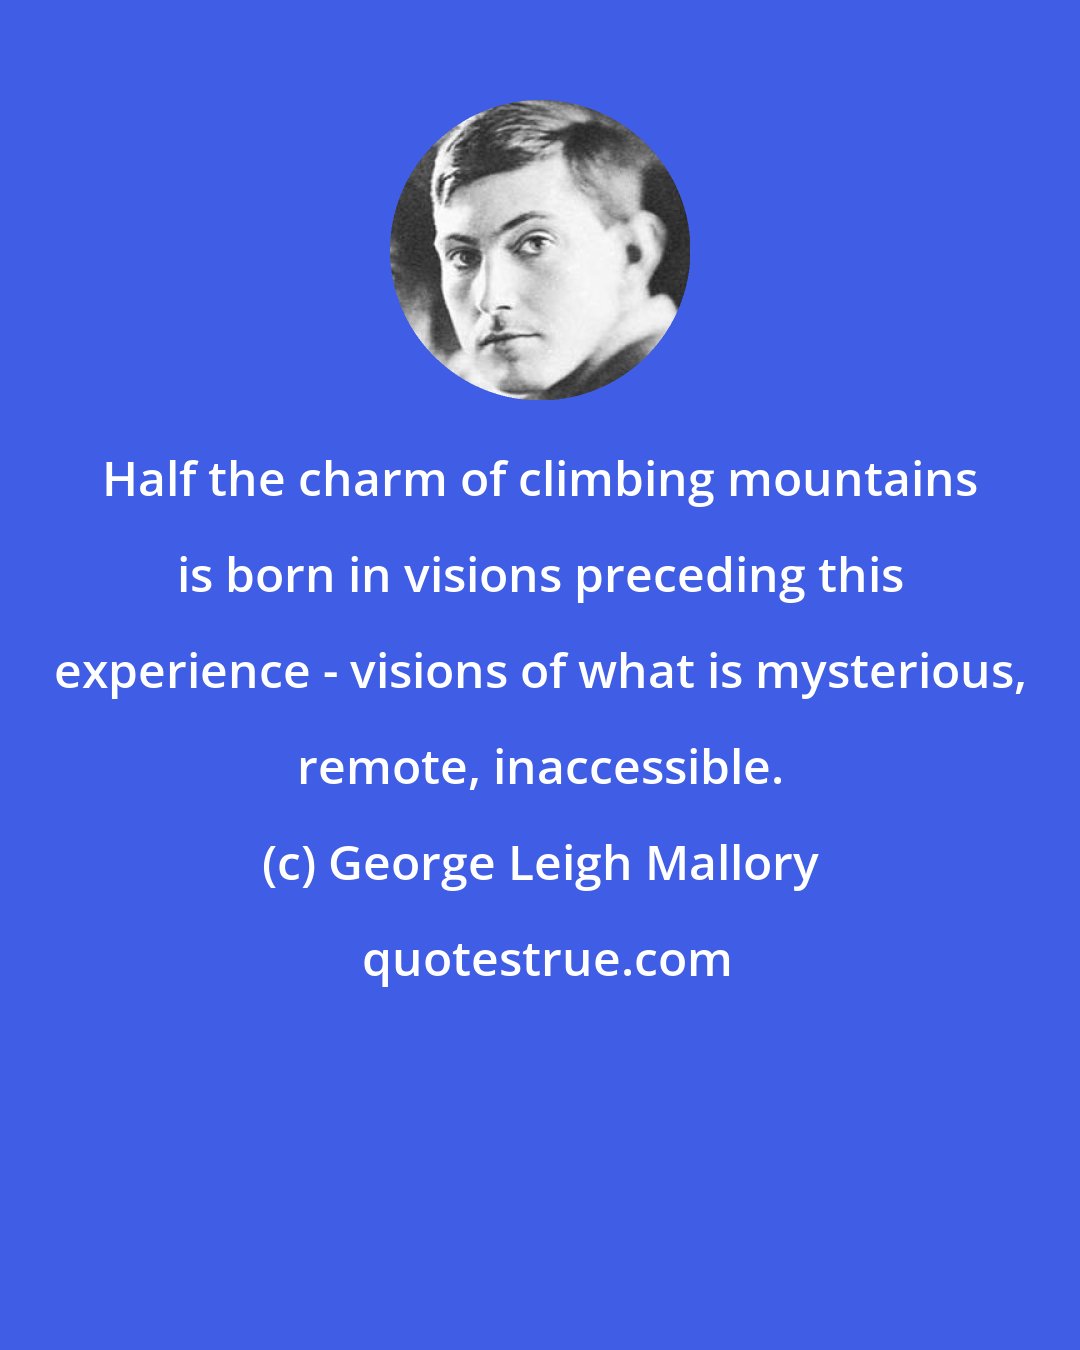 George Leigh Mallory: Half the charm of climbing mountains is born in visions preceding this experience - visions of what is mysterious, remote, inaccessible.